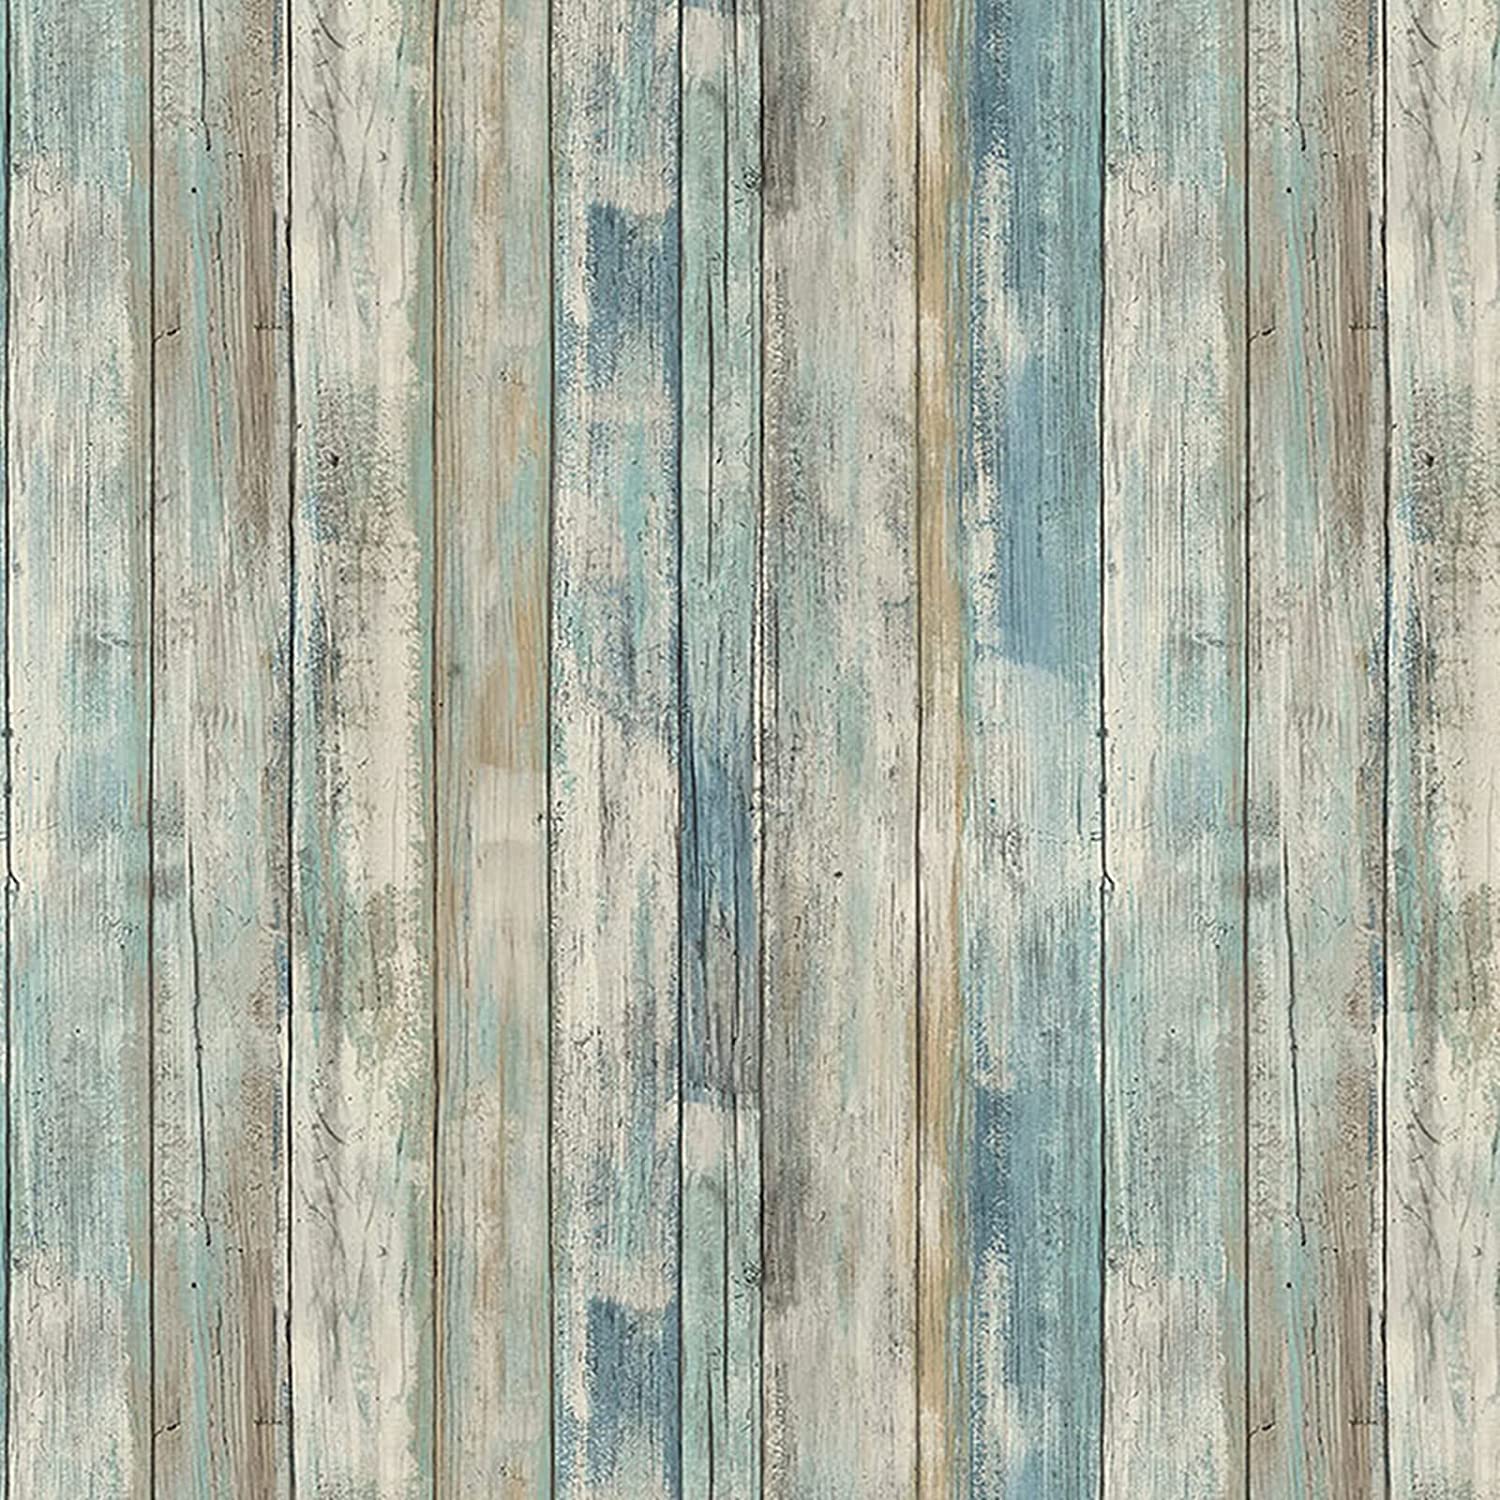 Buy Wood Wallpaper Rustic Distressed Wood Peel And Stick Wallpaper 17.71 X 236.2 Self Adhesive Removable Wall Paper Wood Plank Covering Decorative Vintage Wood Panel Wooden Grain Vinyl Film Roll Online In Indonesia